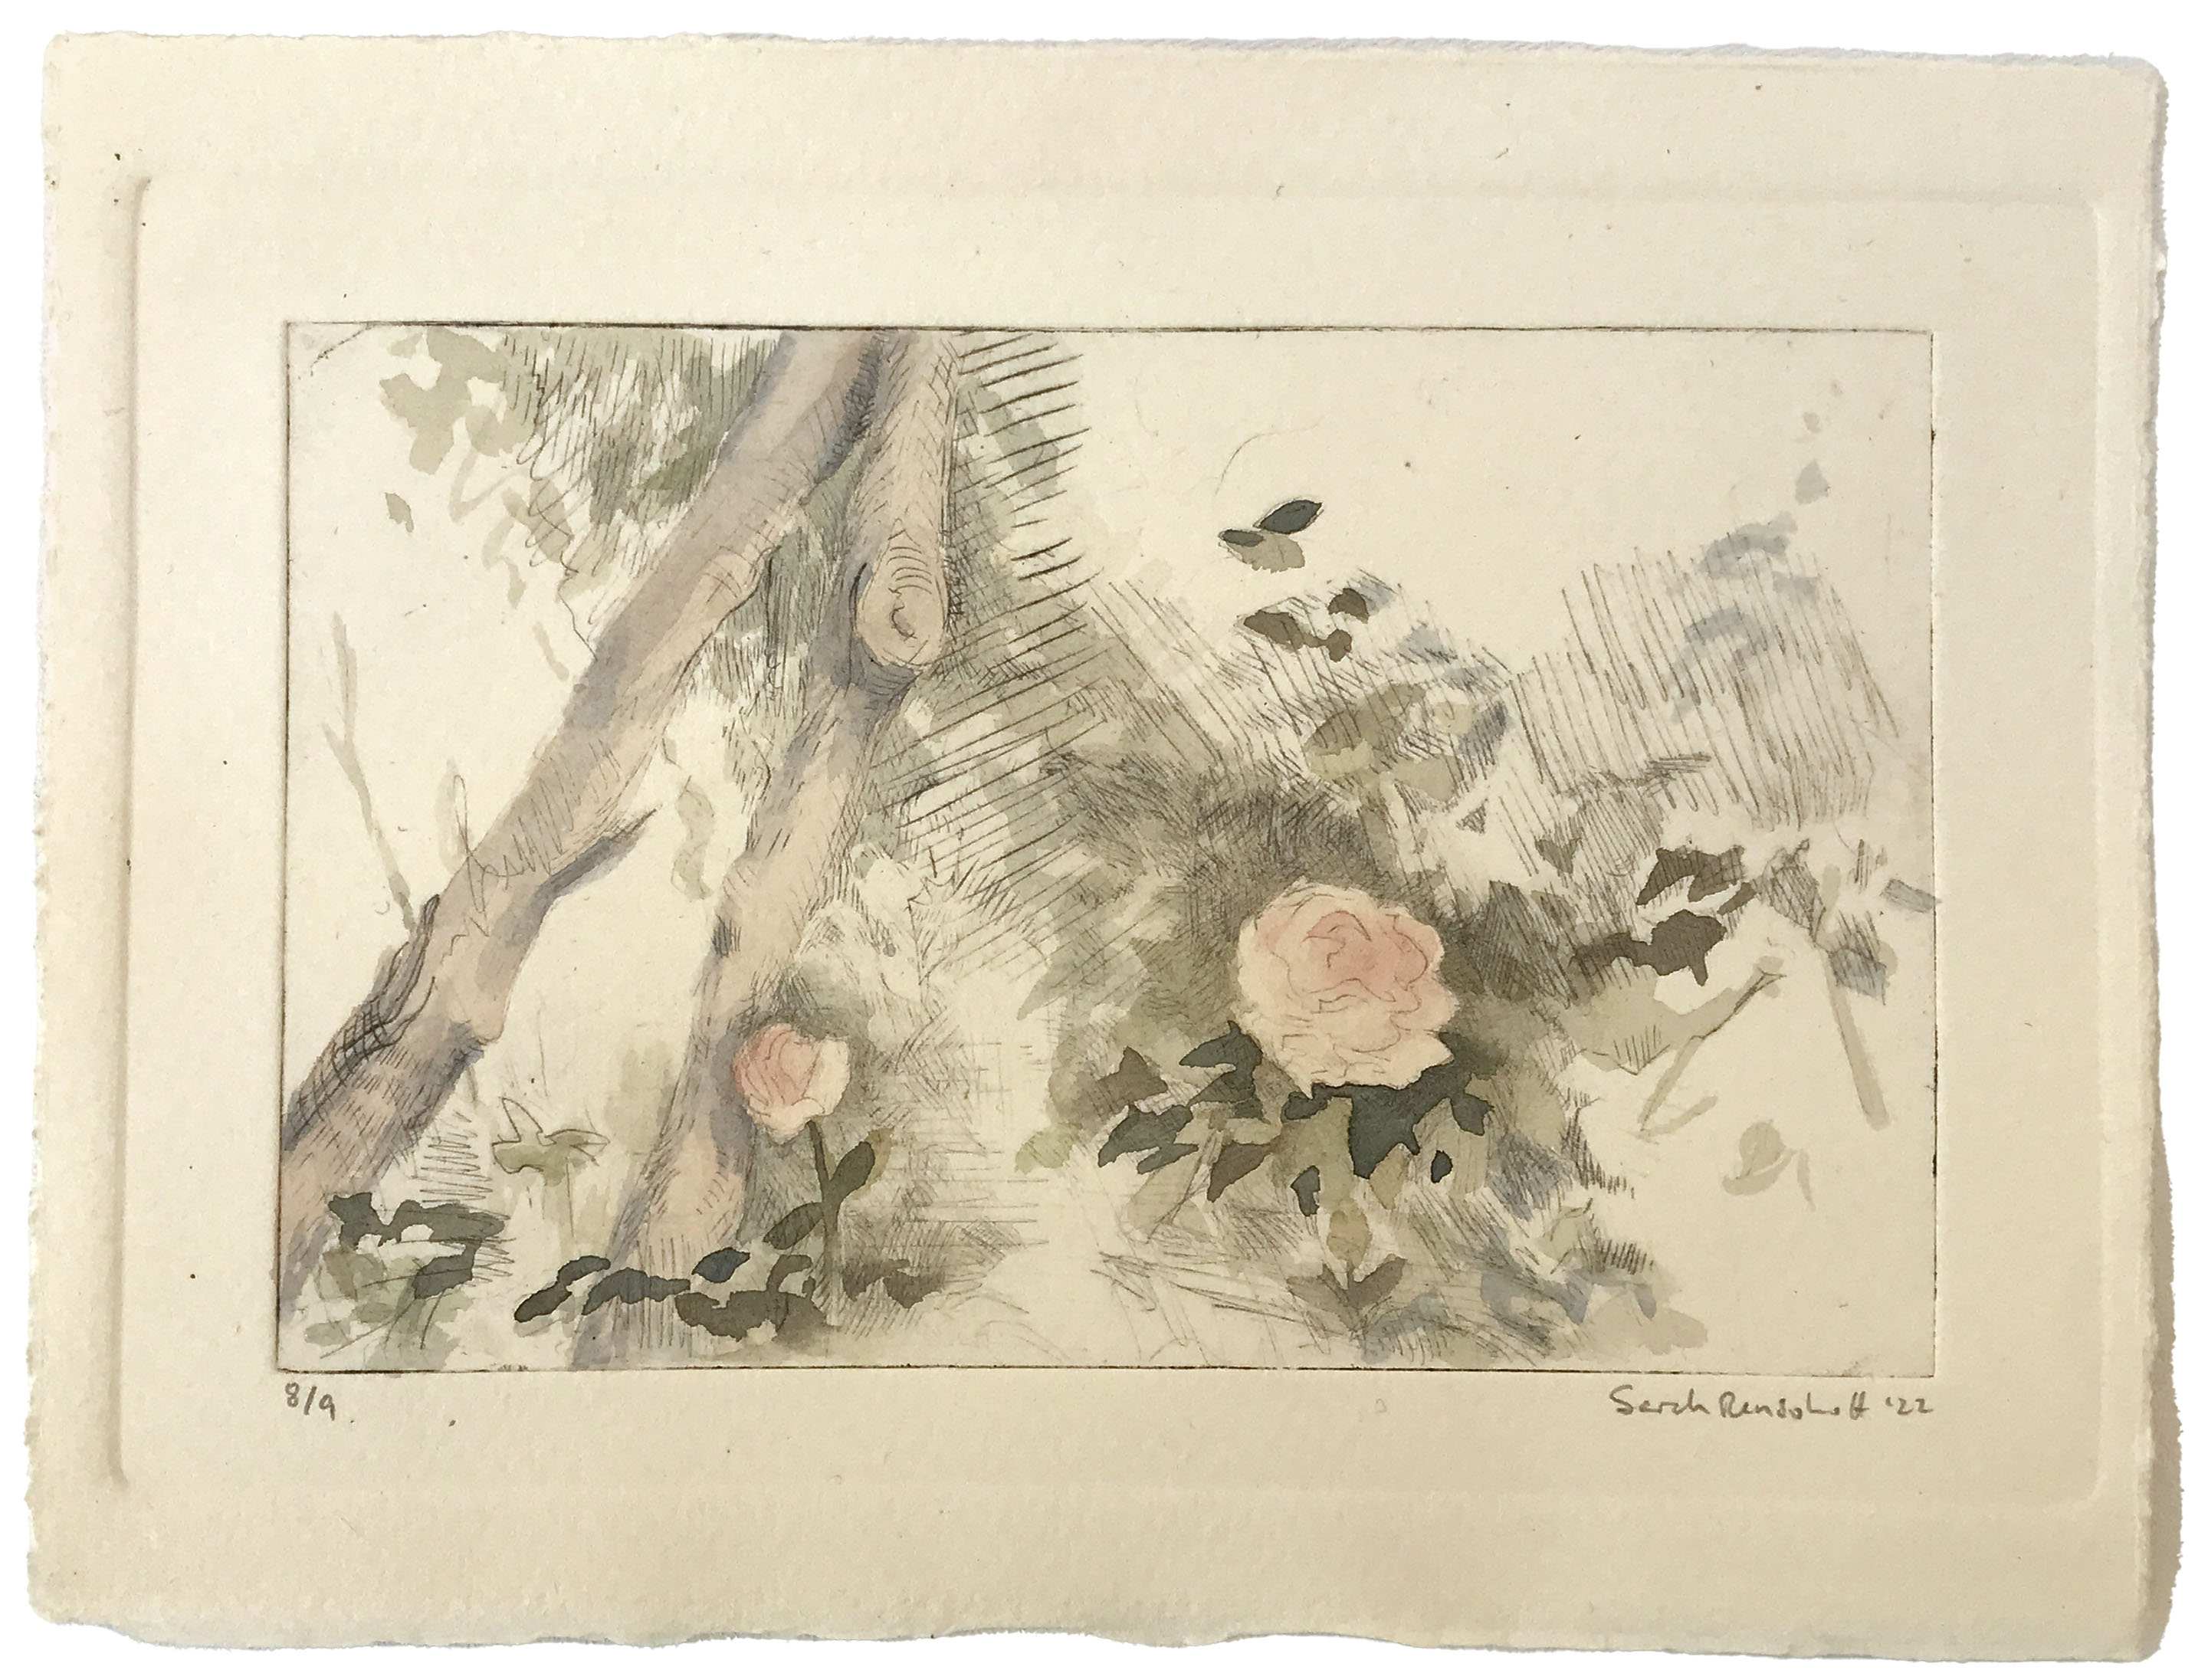 The Ninth Rose\n Click to see all nine\n drypoint and watercolor on cotton\n 6x3.75